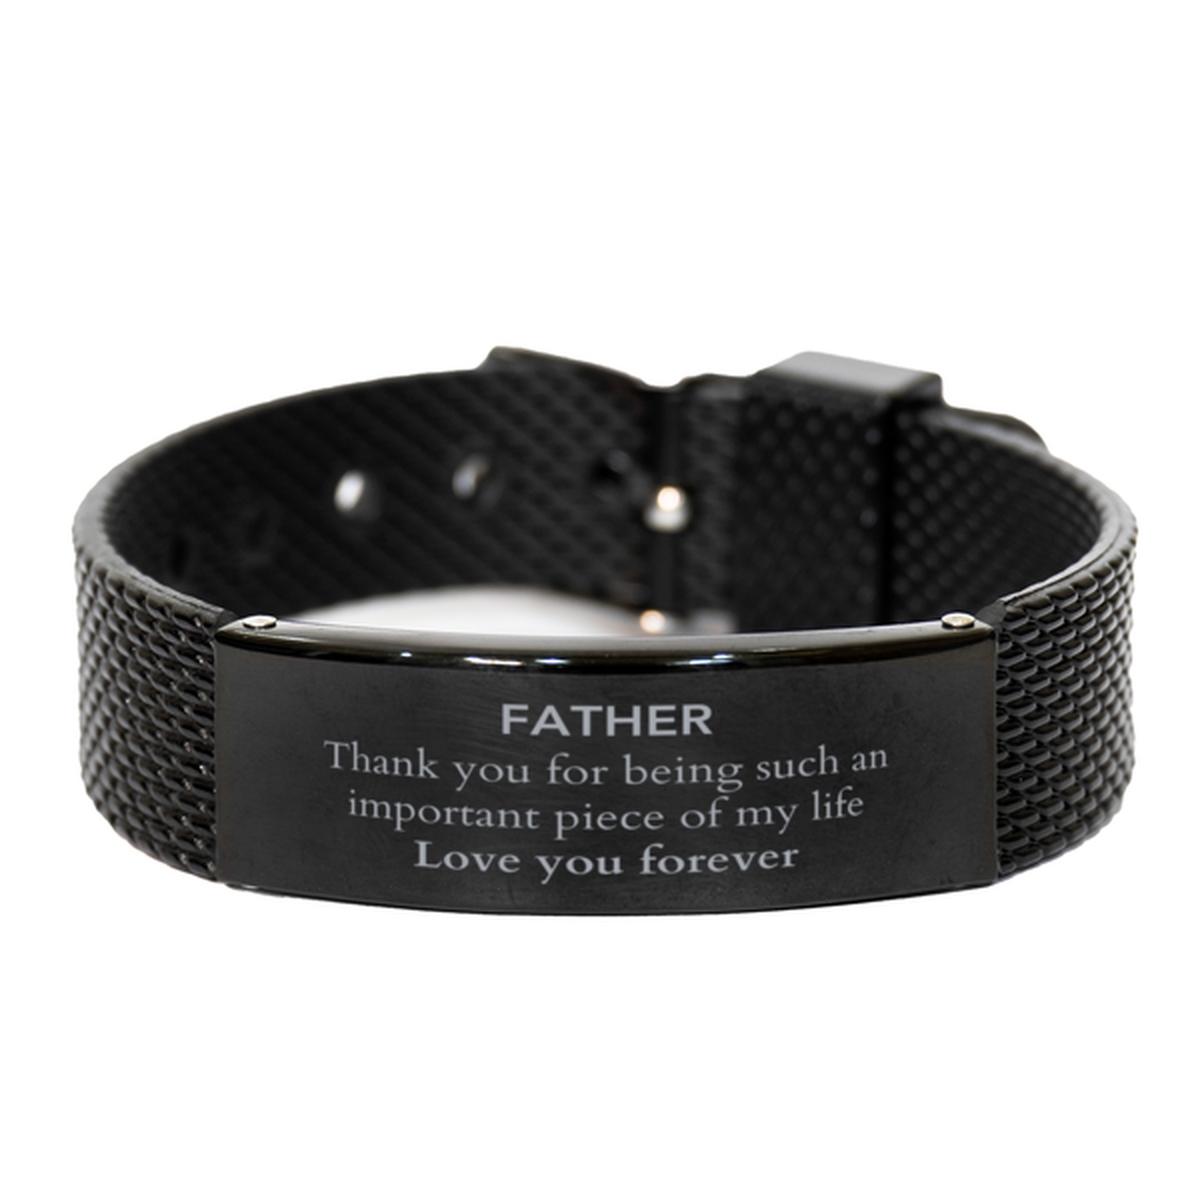 Appropriate Father Black Shark Mesh Bracelet Epic Birthday Gifts for Father Thank you for being such an important piece of my life Father Christmas Mothers Fathers Day